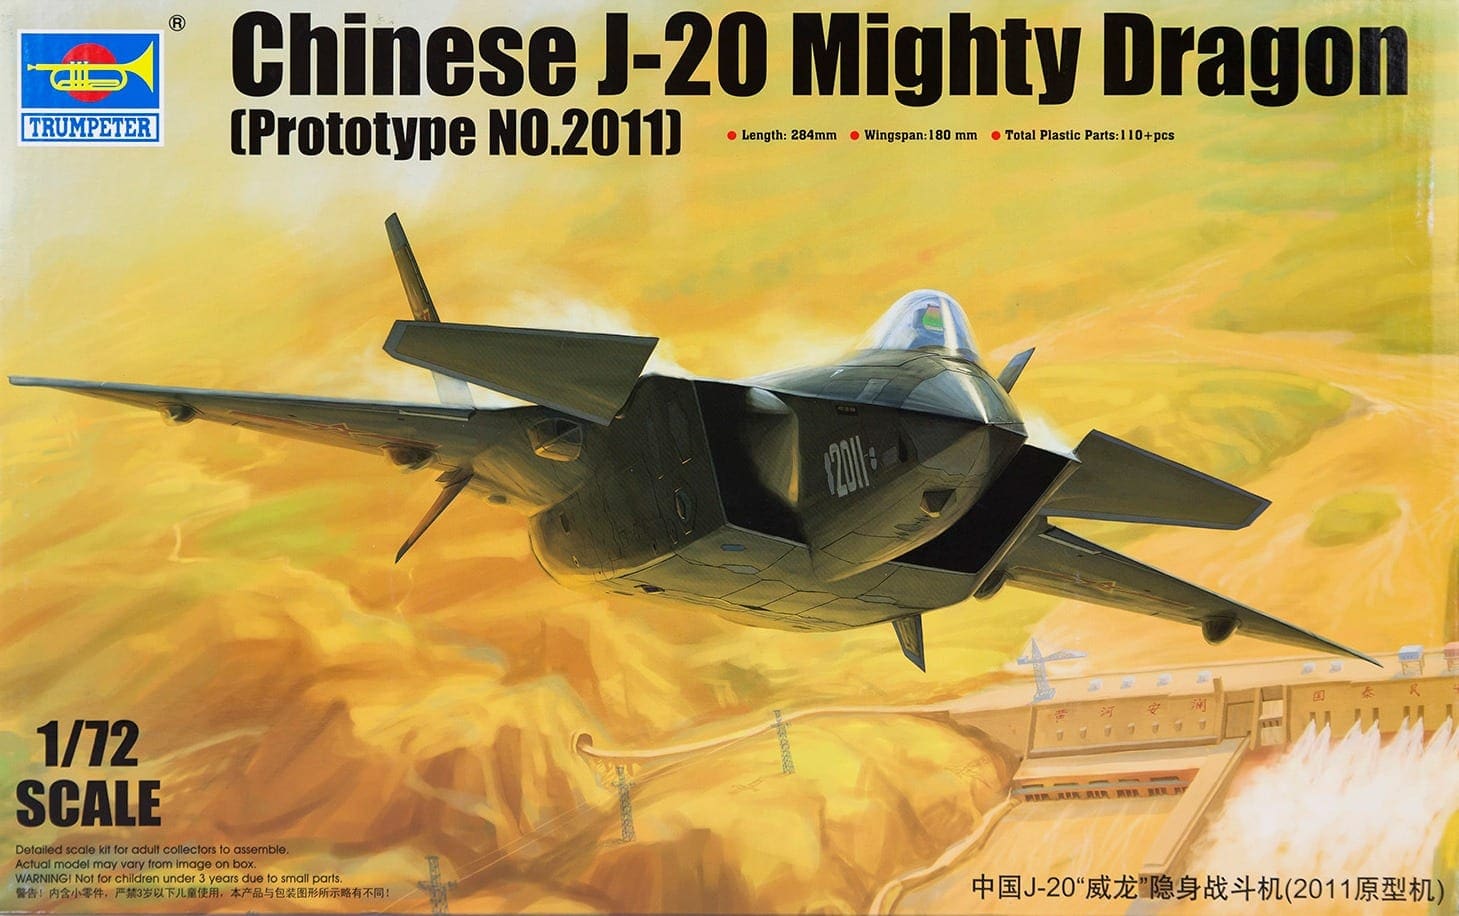 BRONCO GB7010 1//72 PLA Air Force J-20 /"Mighty Dragon/" Stealth Fighter